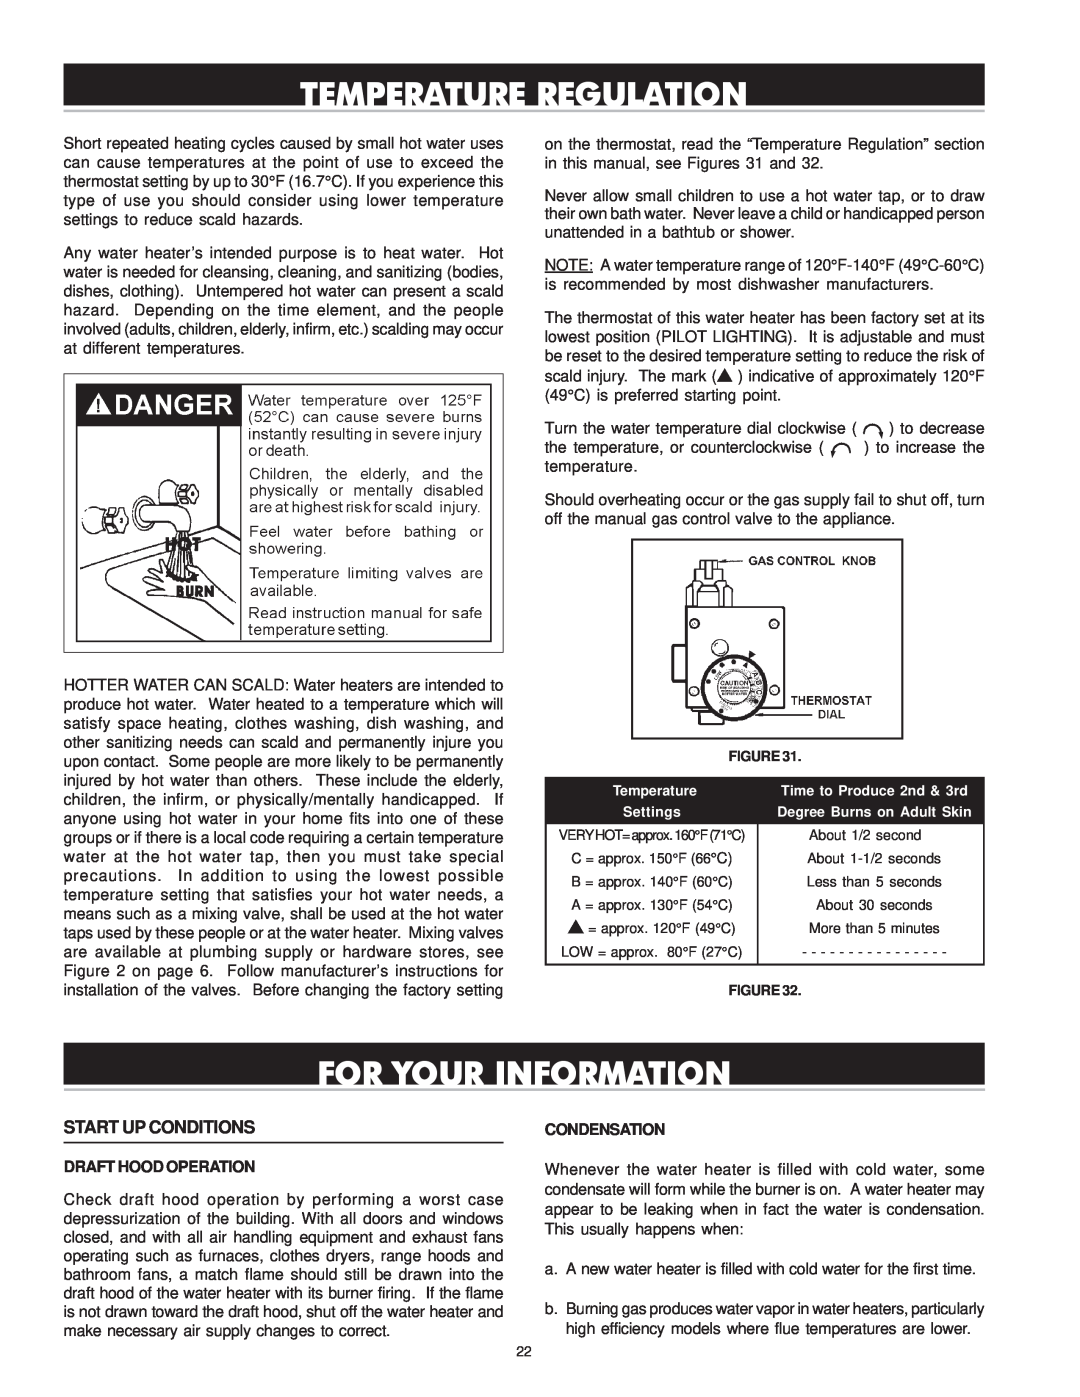 Reliance Water Heaters 196296-001 Temperature Regulation, For Your Information, Start Up Conditions, Draft Hood Operation 